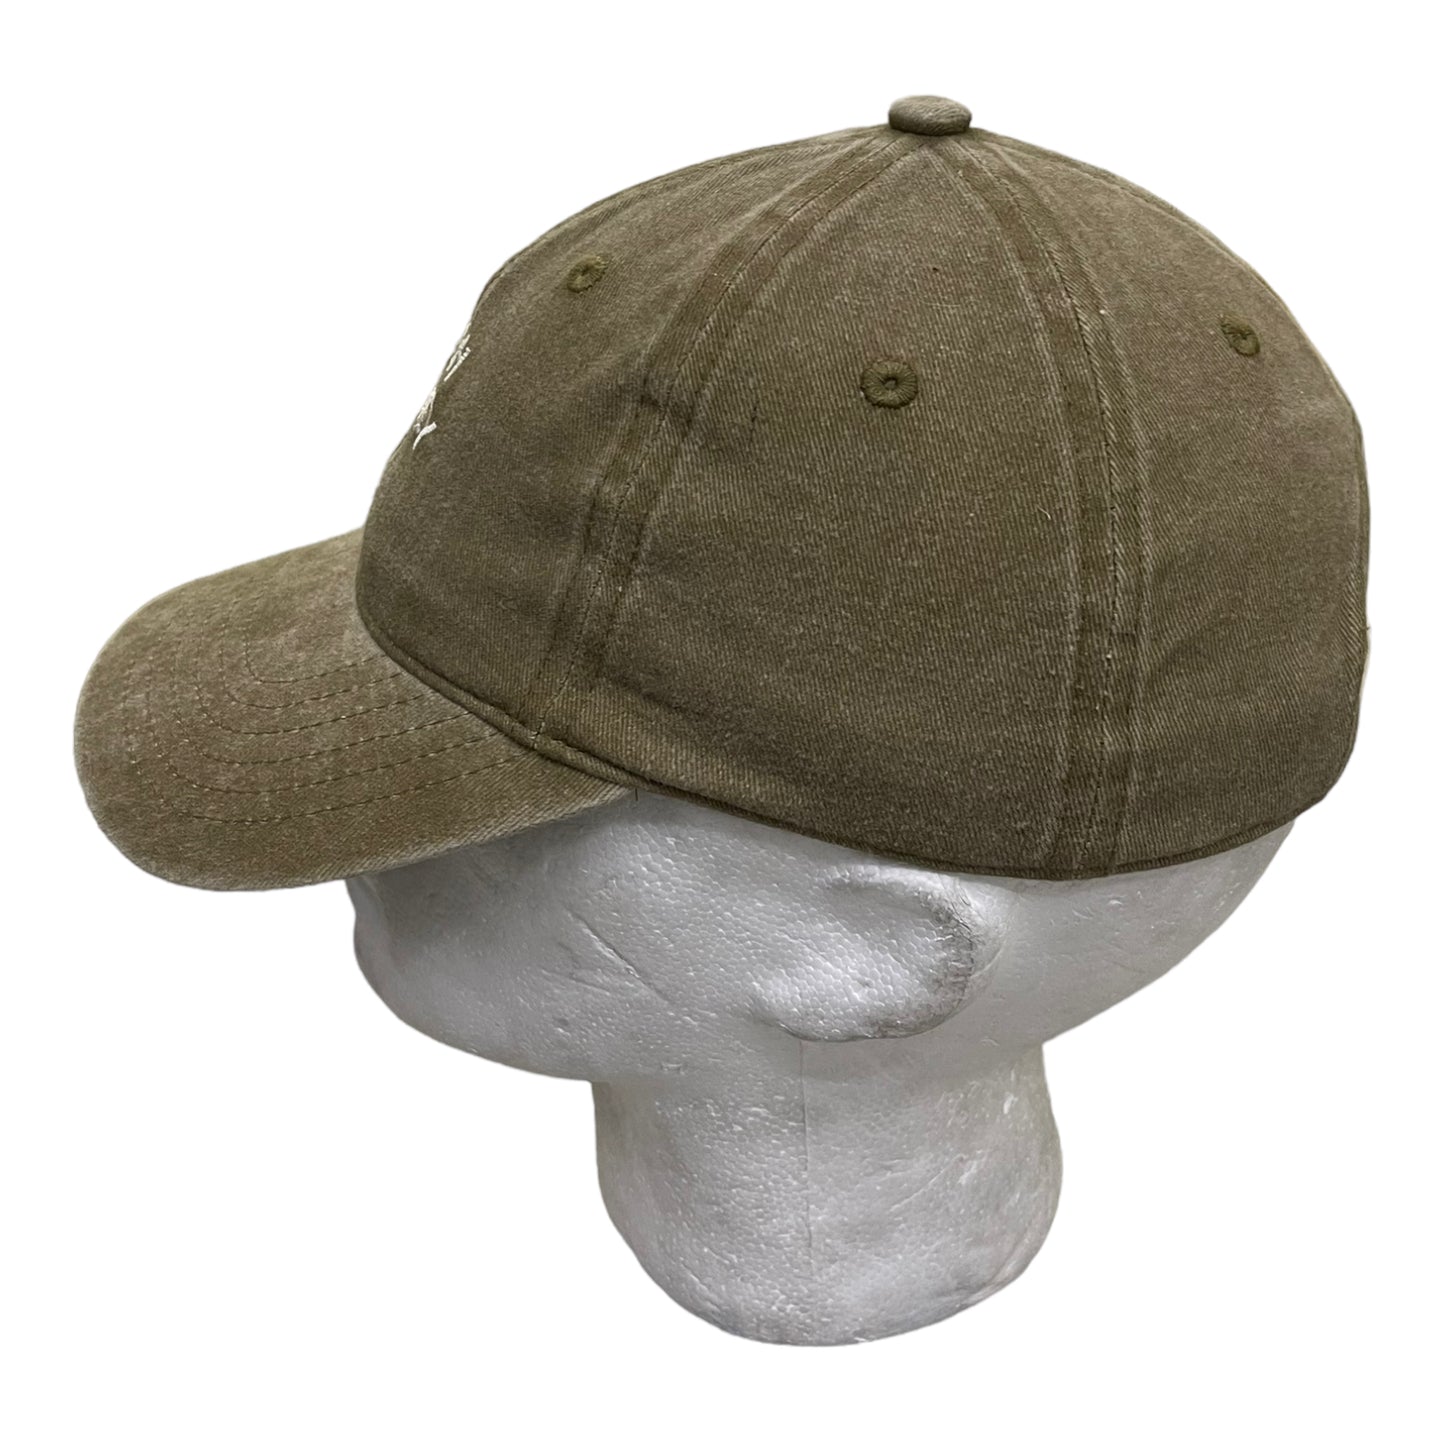 ‘Hipish Hackney’ Recycled Cotton Cap in Washed Tan Olive - One Size Fits All